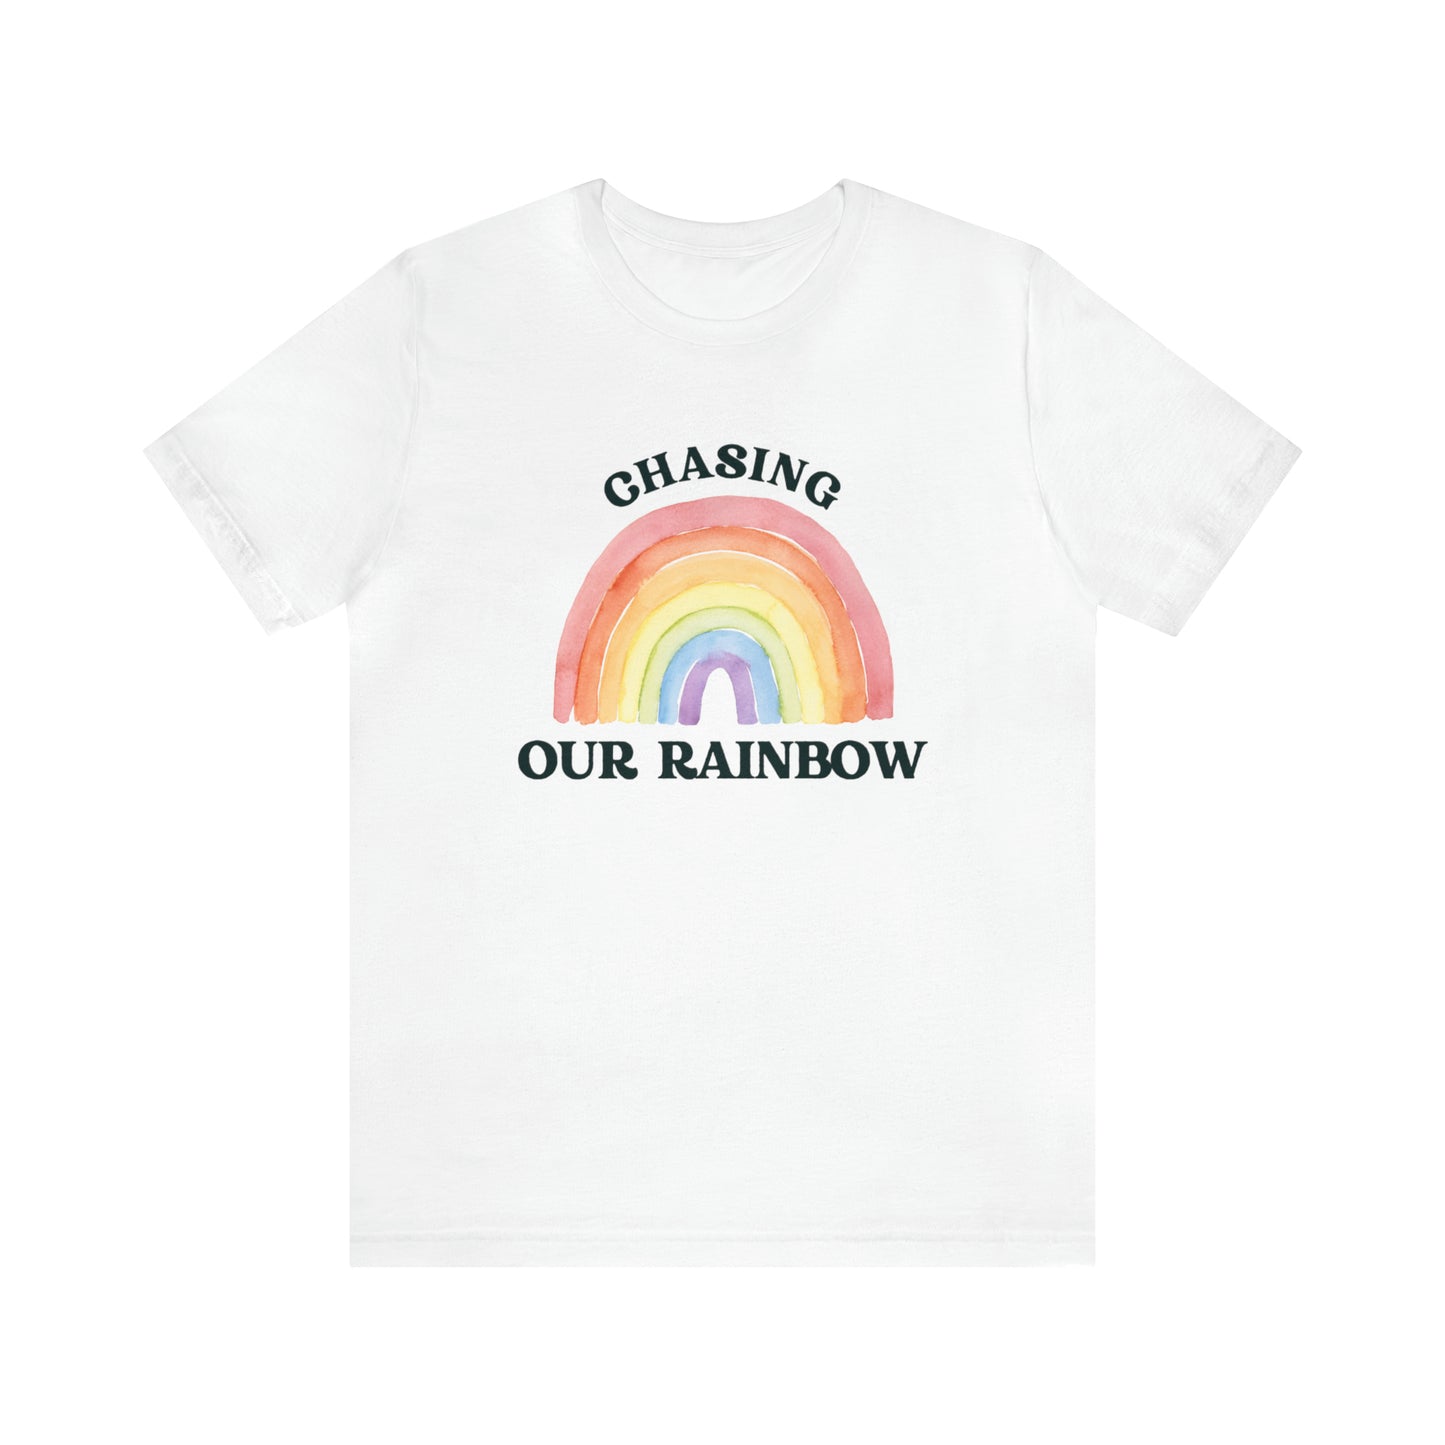 "Chasing Our Rainbow" Bella Canvas Short Sleeve Tee